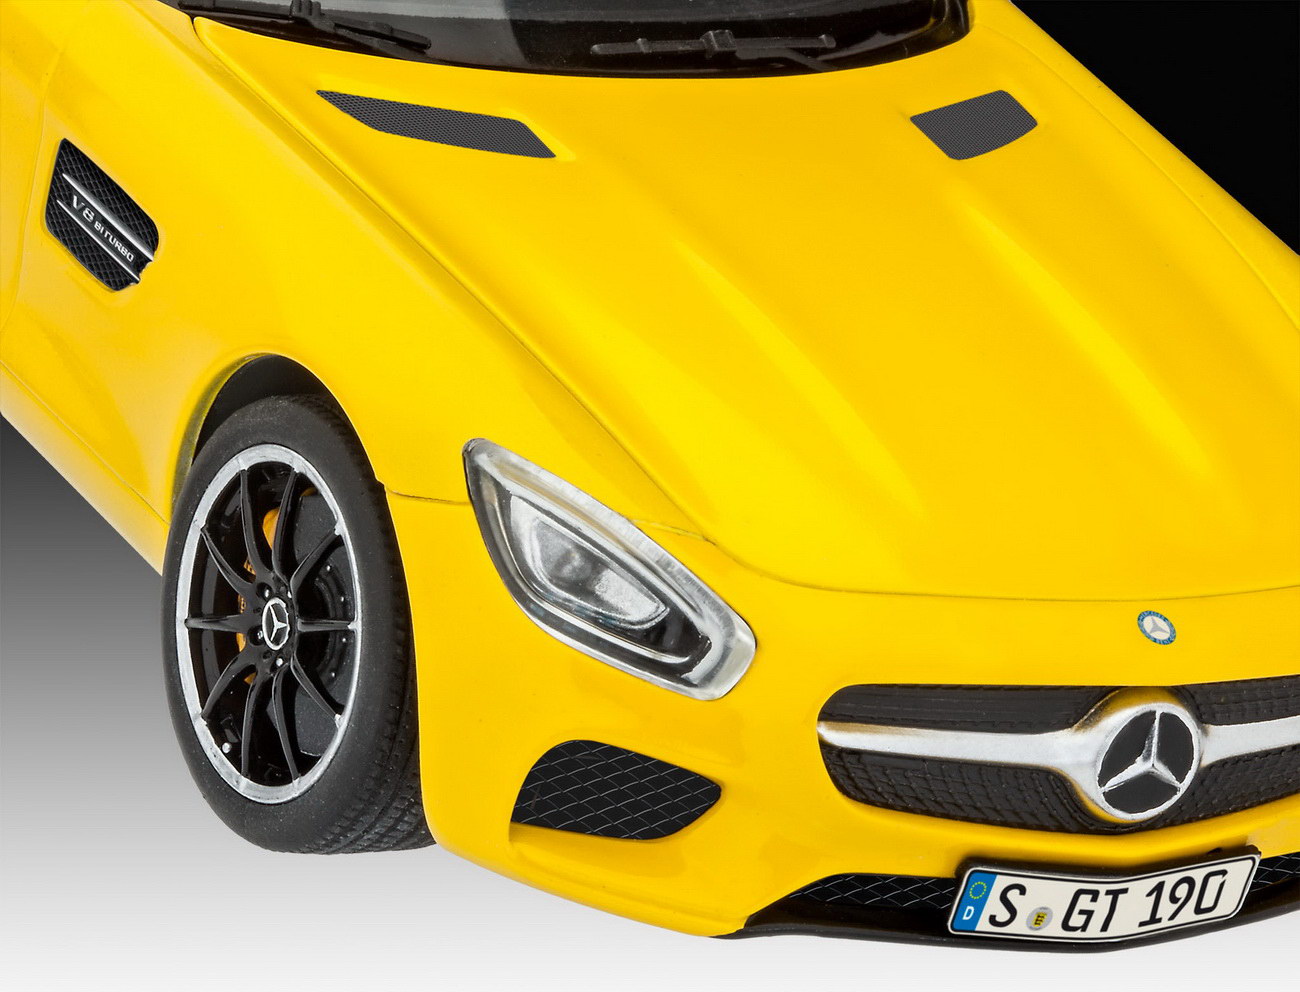 Revell 07028 - Mercedes-AMG GT - Auto Modell